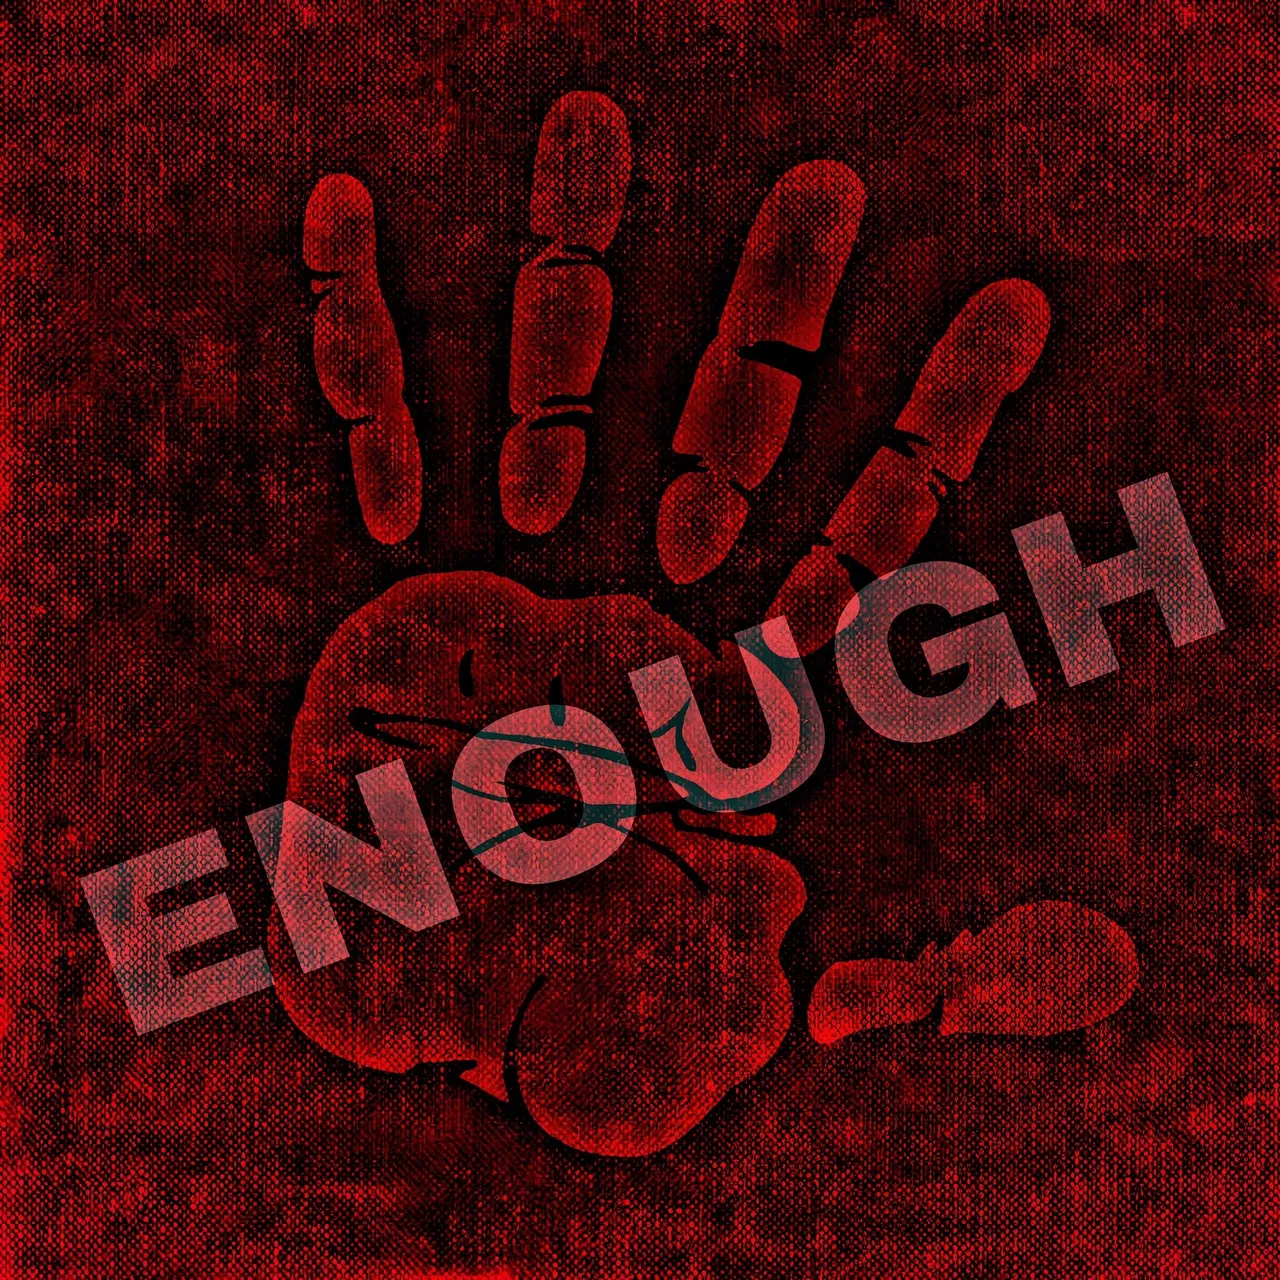 A handprint with the word “Enough” written in red color